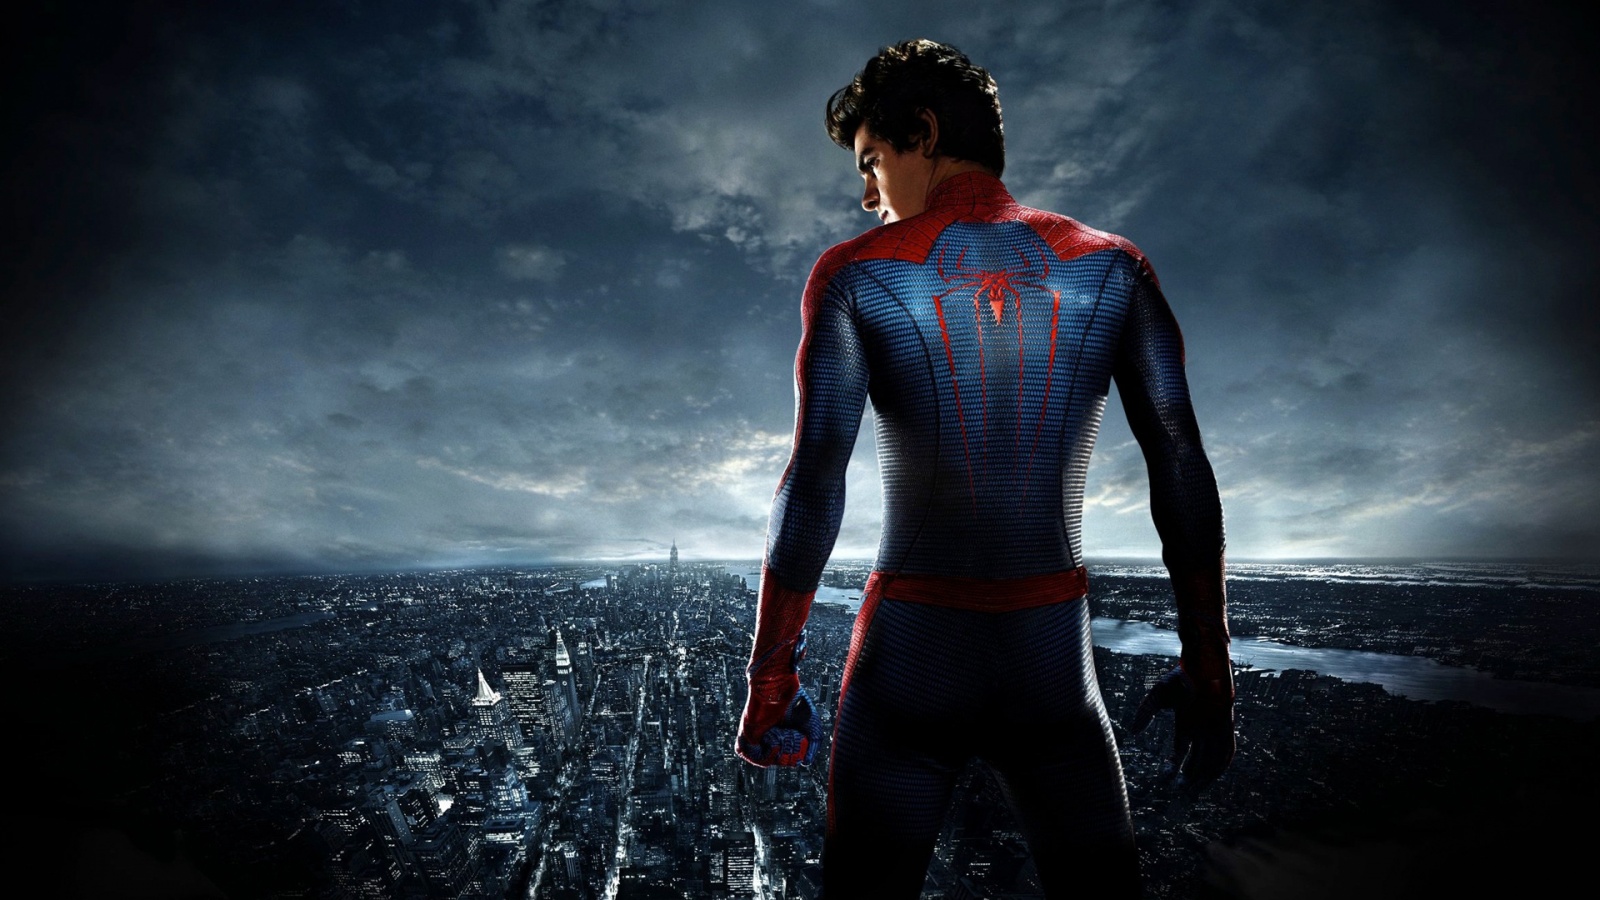 EVERY THING HD  WALLPAPERS  Spiderman  New HD  Wallpapers  2013